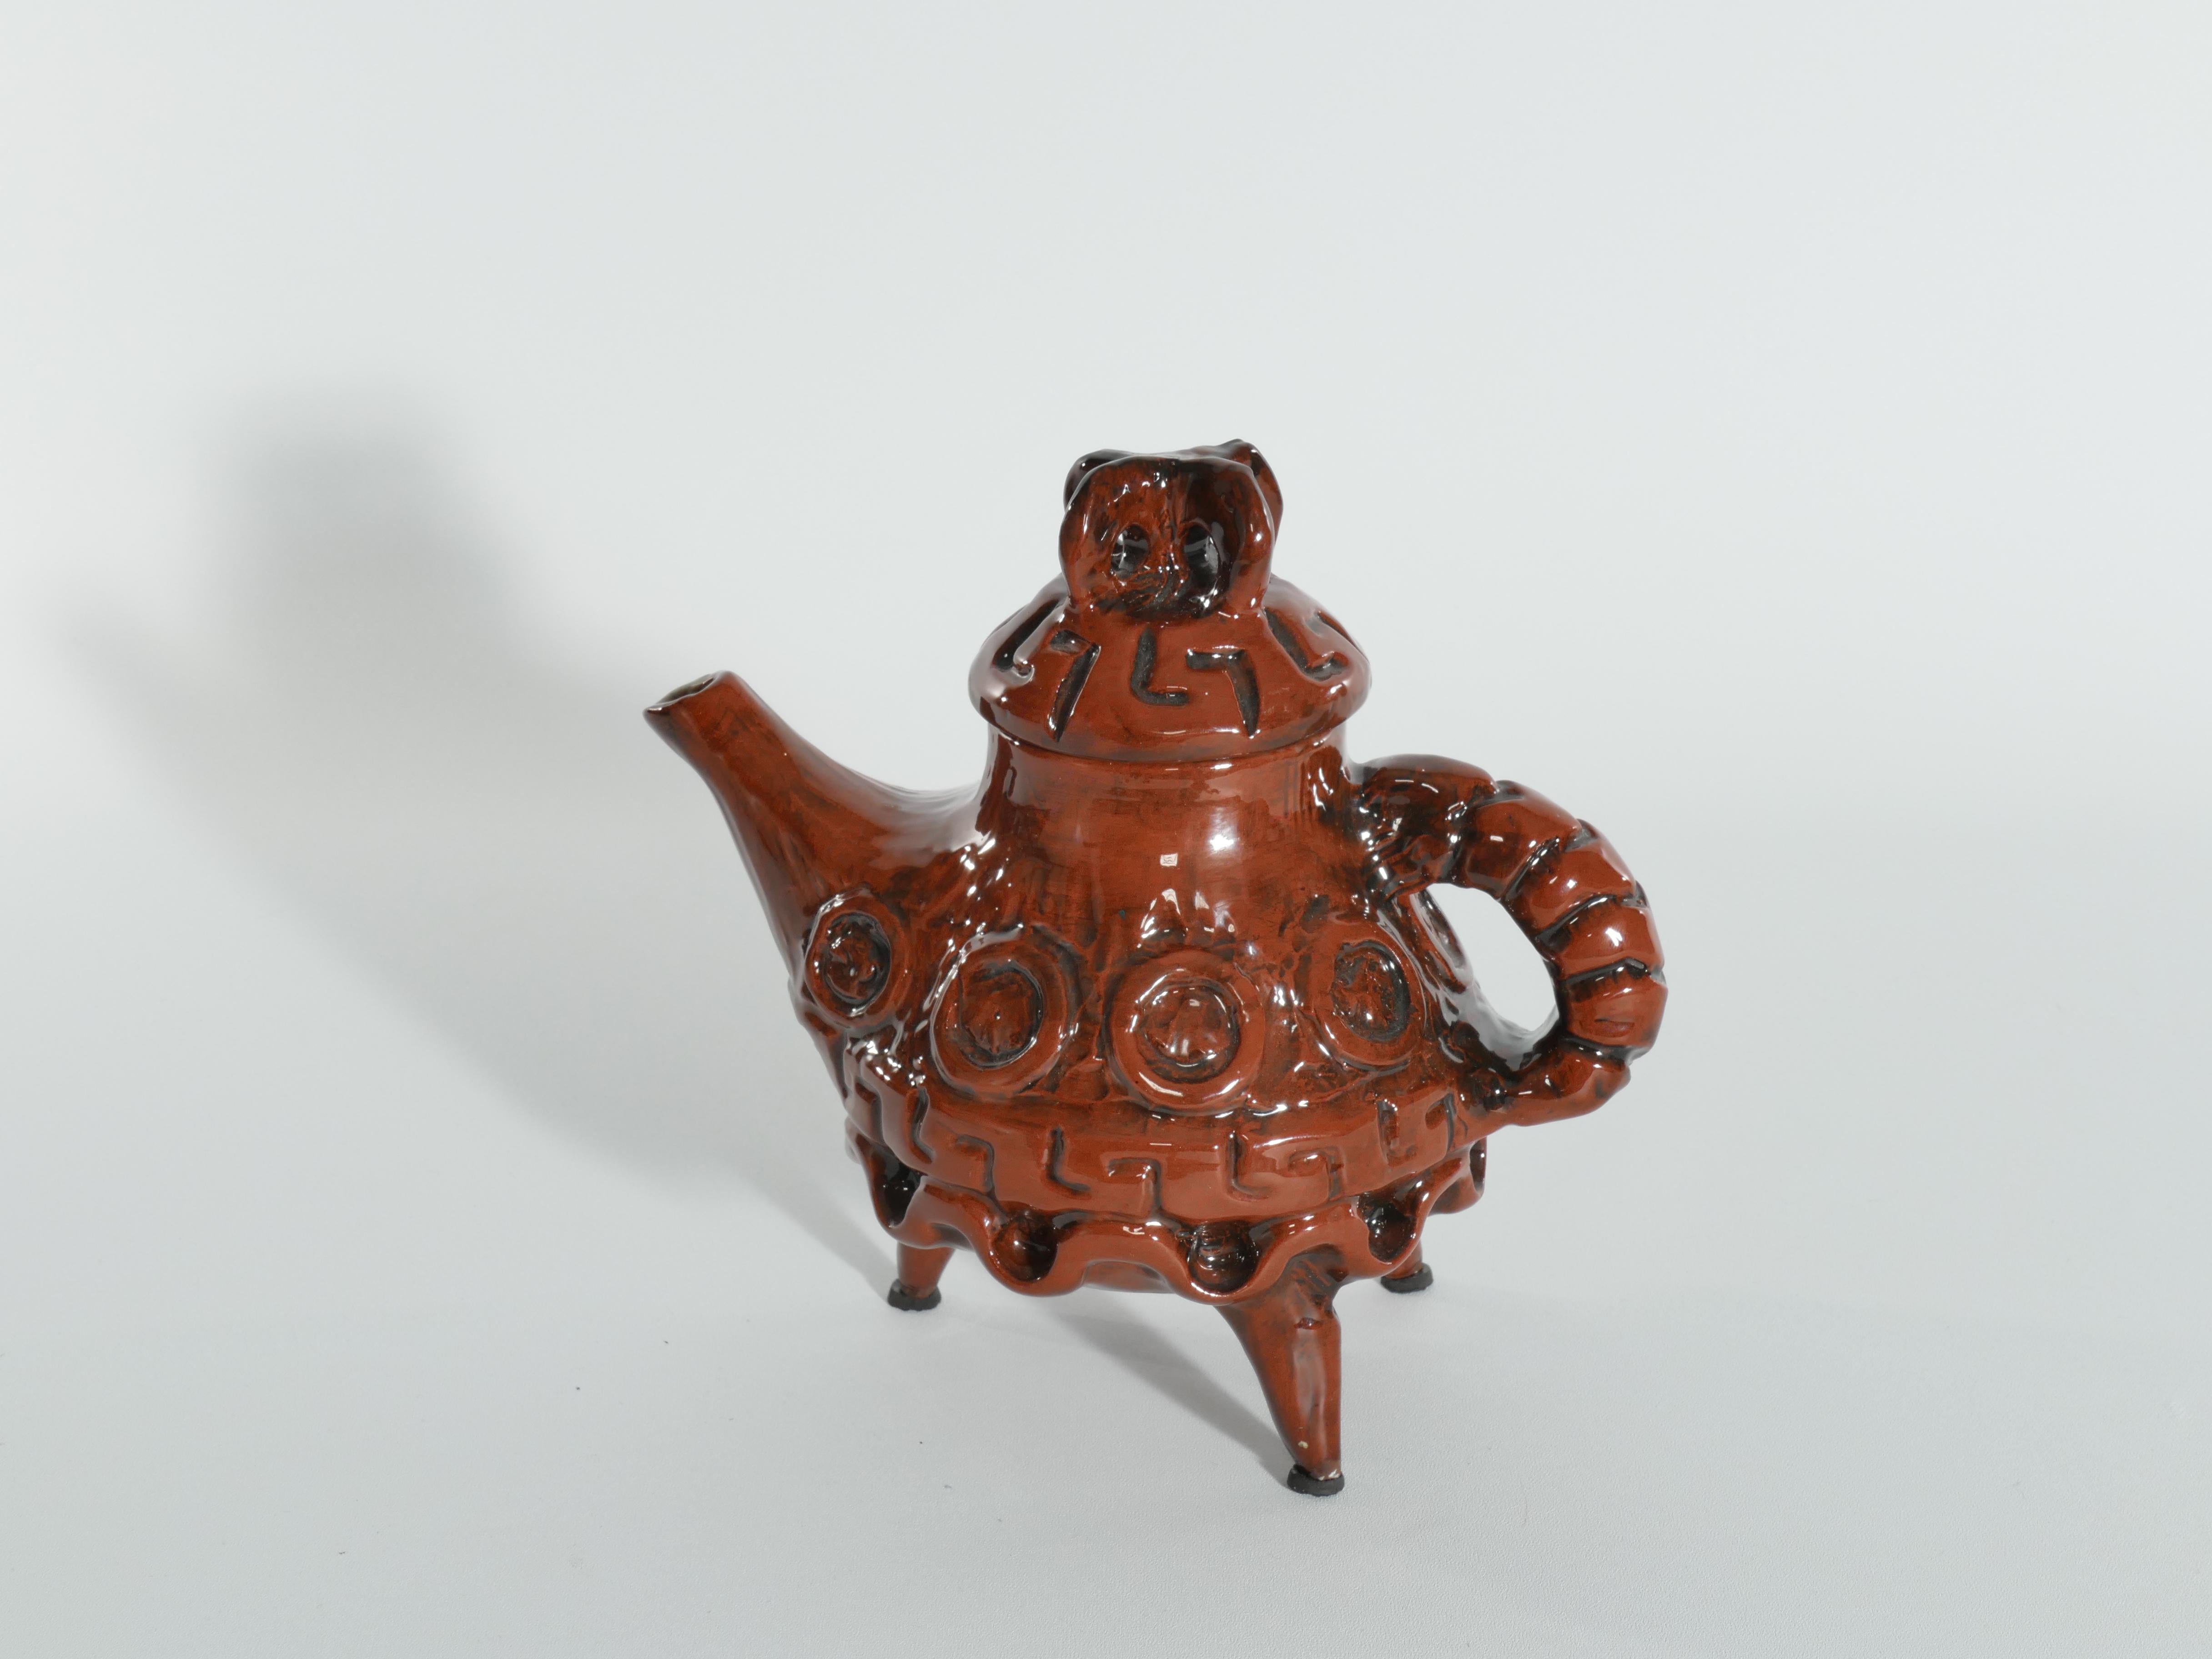 Vintage Playful Teapot with Crab-like Features by Allan Hellman Sweden 1982  In Good Condition For Sale In Grythyttan, SE